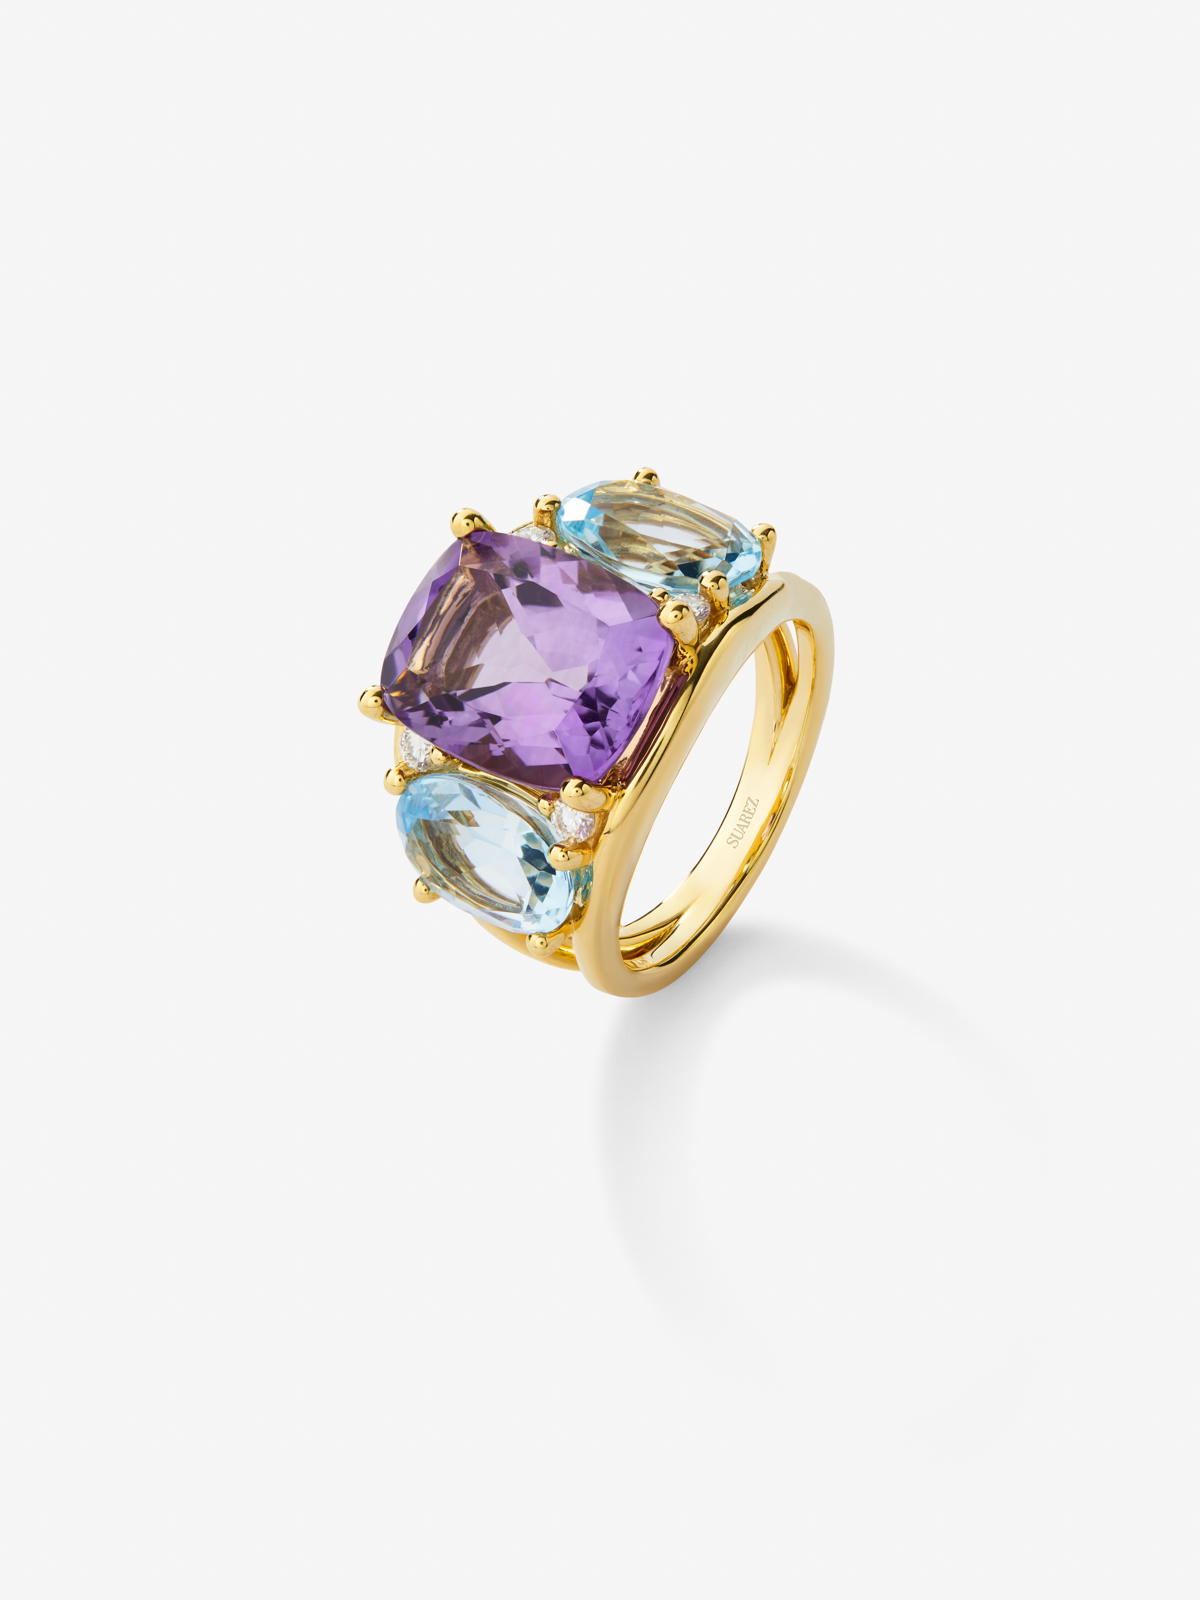 18kt yellow gold ring with diamonds, Sky and amethyst topacios